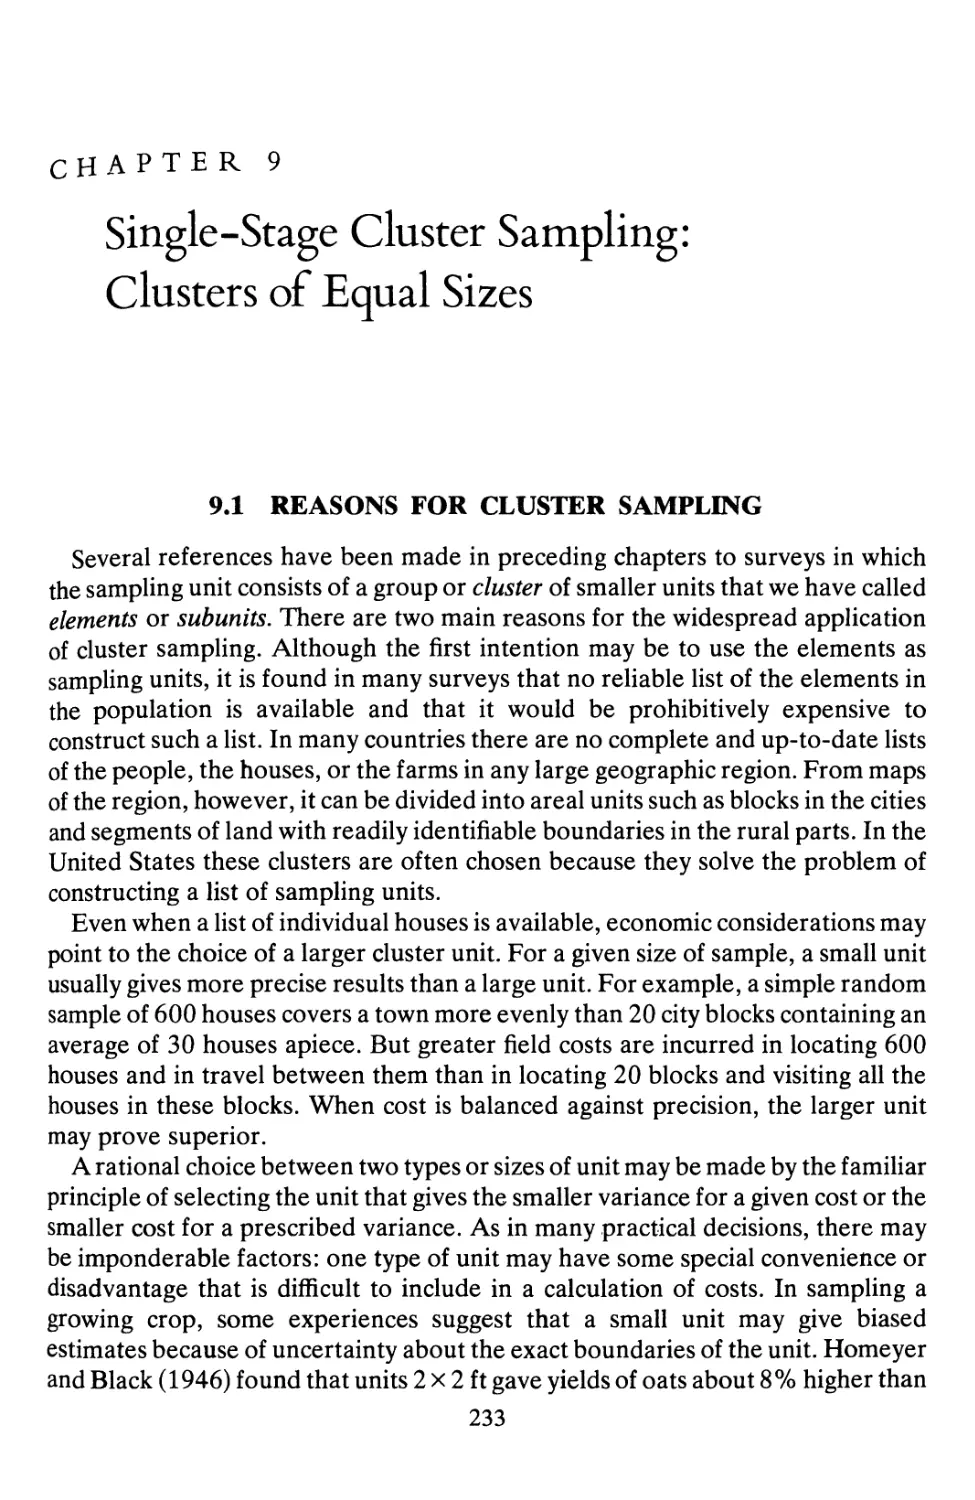 9 Single-Stage Cluster Sampling: Clusters of Equal Sizes